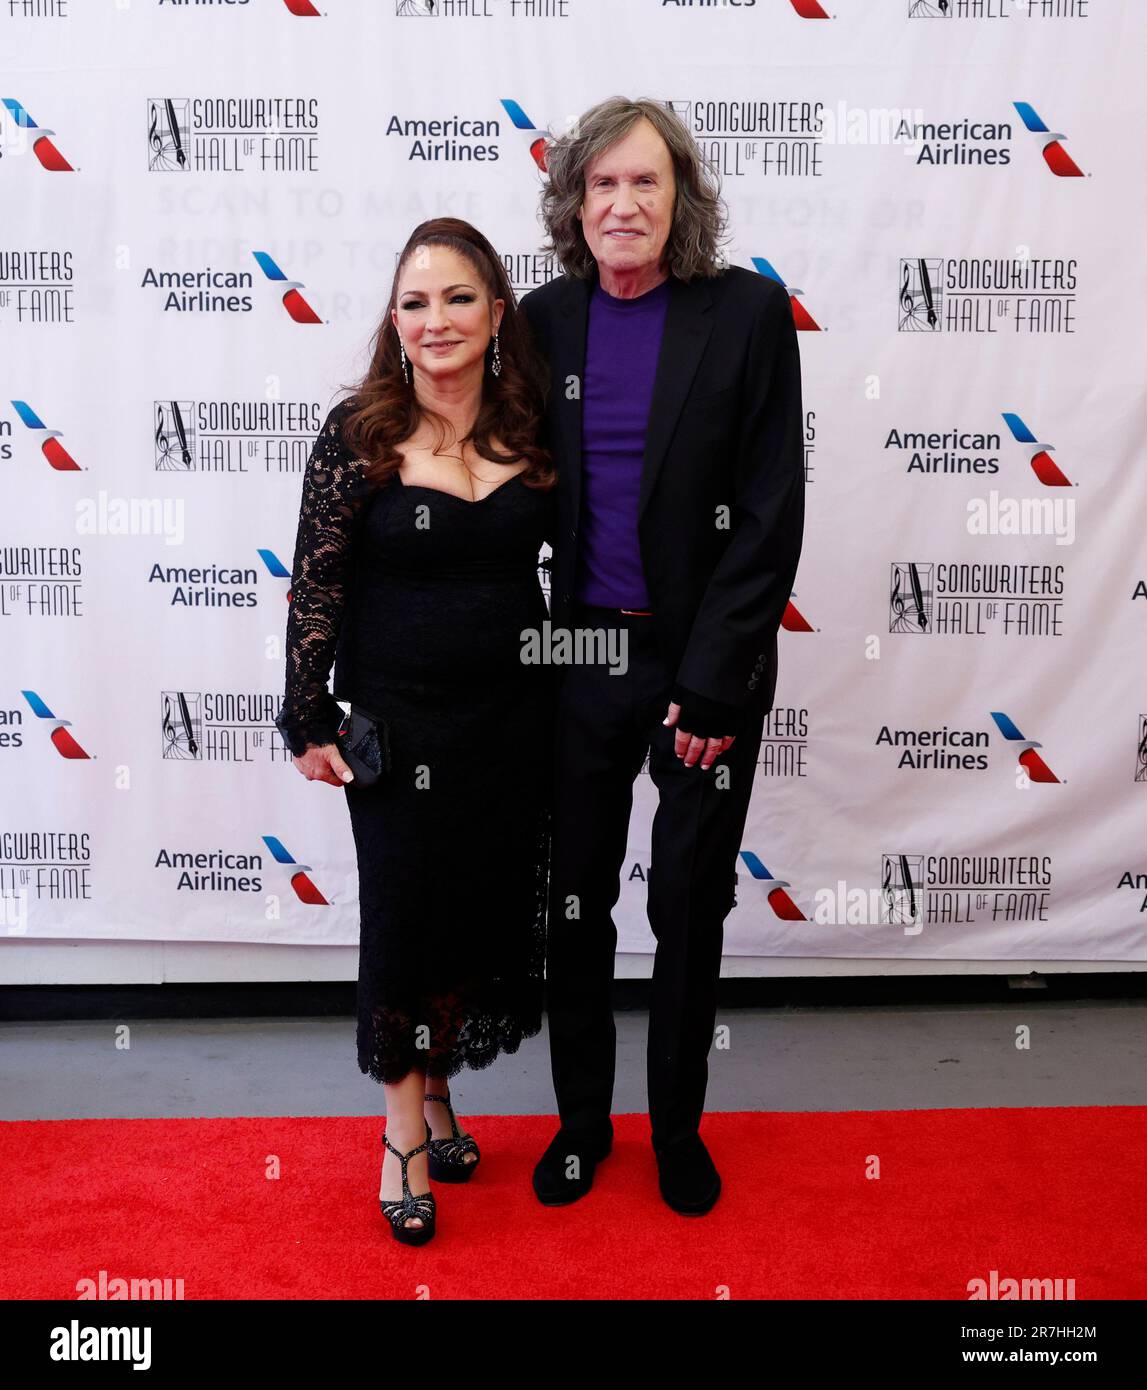 New York, United States. 15th June, 2023. Gloria Estefan and Glen Ballard arrive on the red carpet at the 2023 Songwriters Hall of Fame Induction and Awards Gala at the New York Marriott Marquis on Thursday, June 15, 2023 in New York City. Photo by John Angelillo/UPI Credit: UPI/Alamy Live News Stock Photo